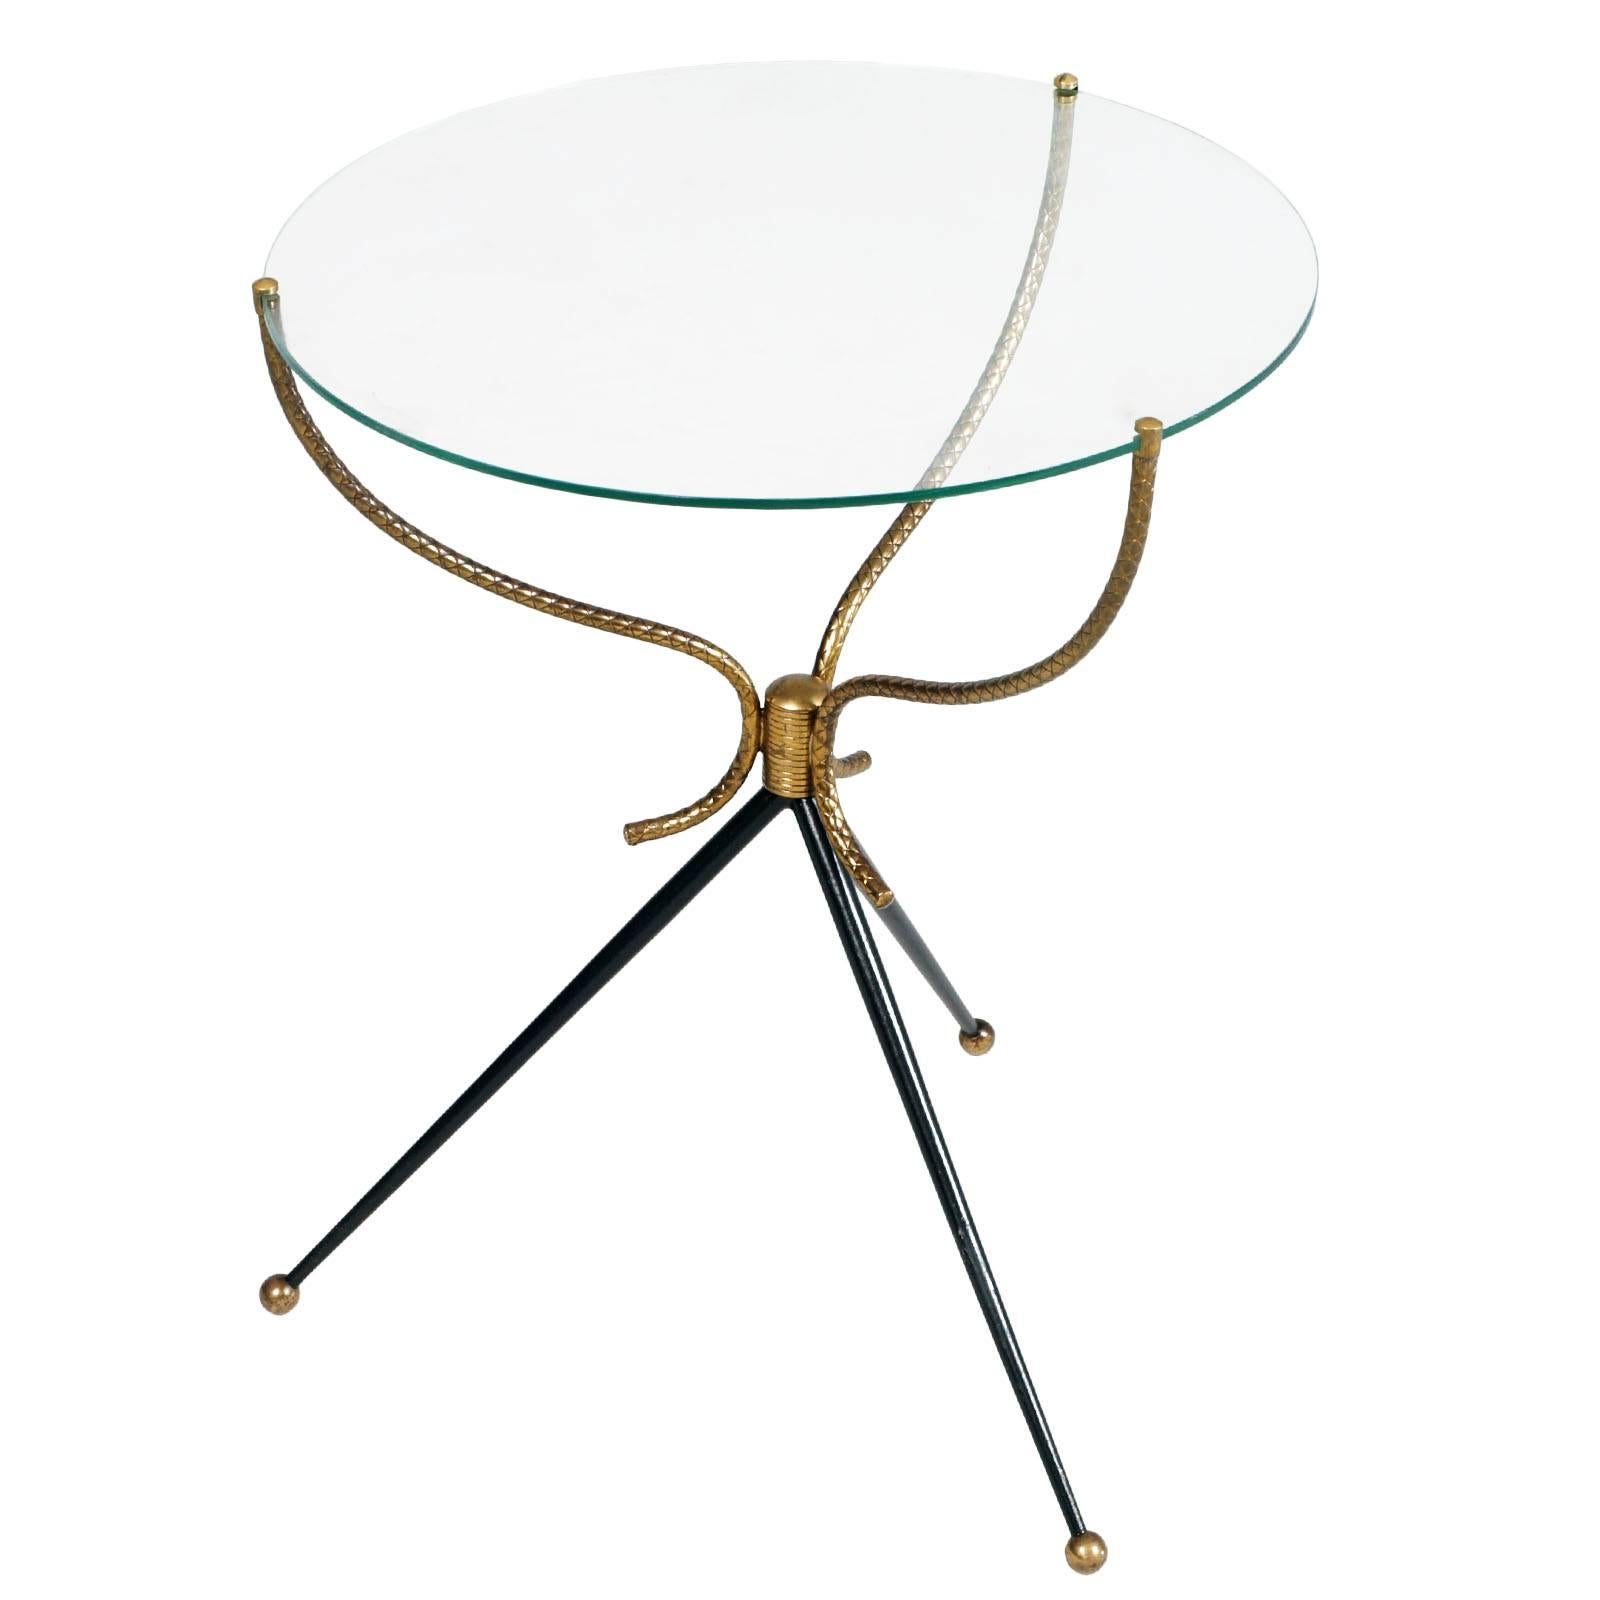 1930s Gio Ponti Style Tripod Coffee Table, Gilt and Lacquered Brass, Cristal Top For Sale